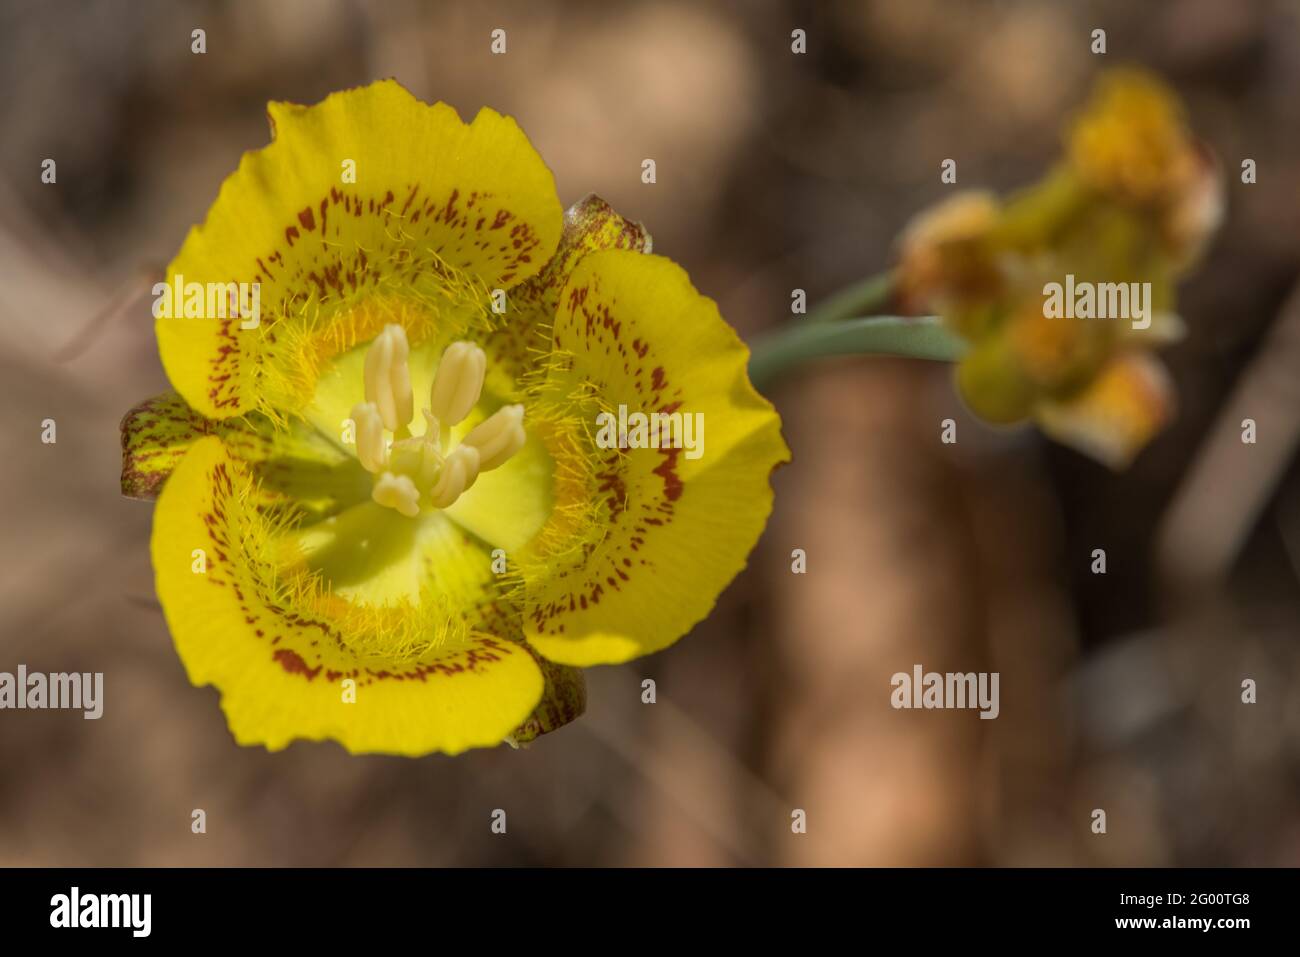 The yellow mariposa lily (Calochortus luteus) a colorful and vibrant California flower. Stock Photo